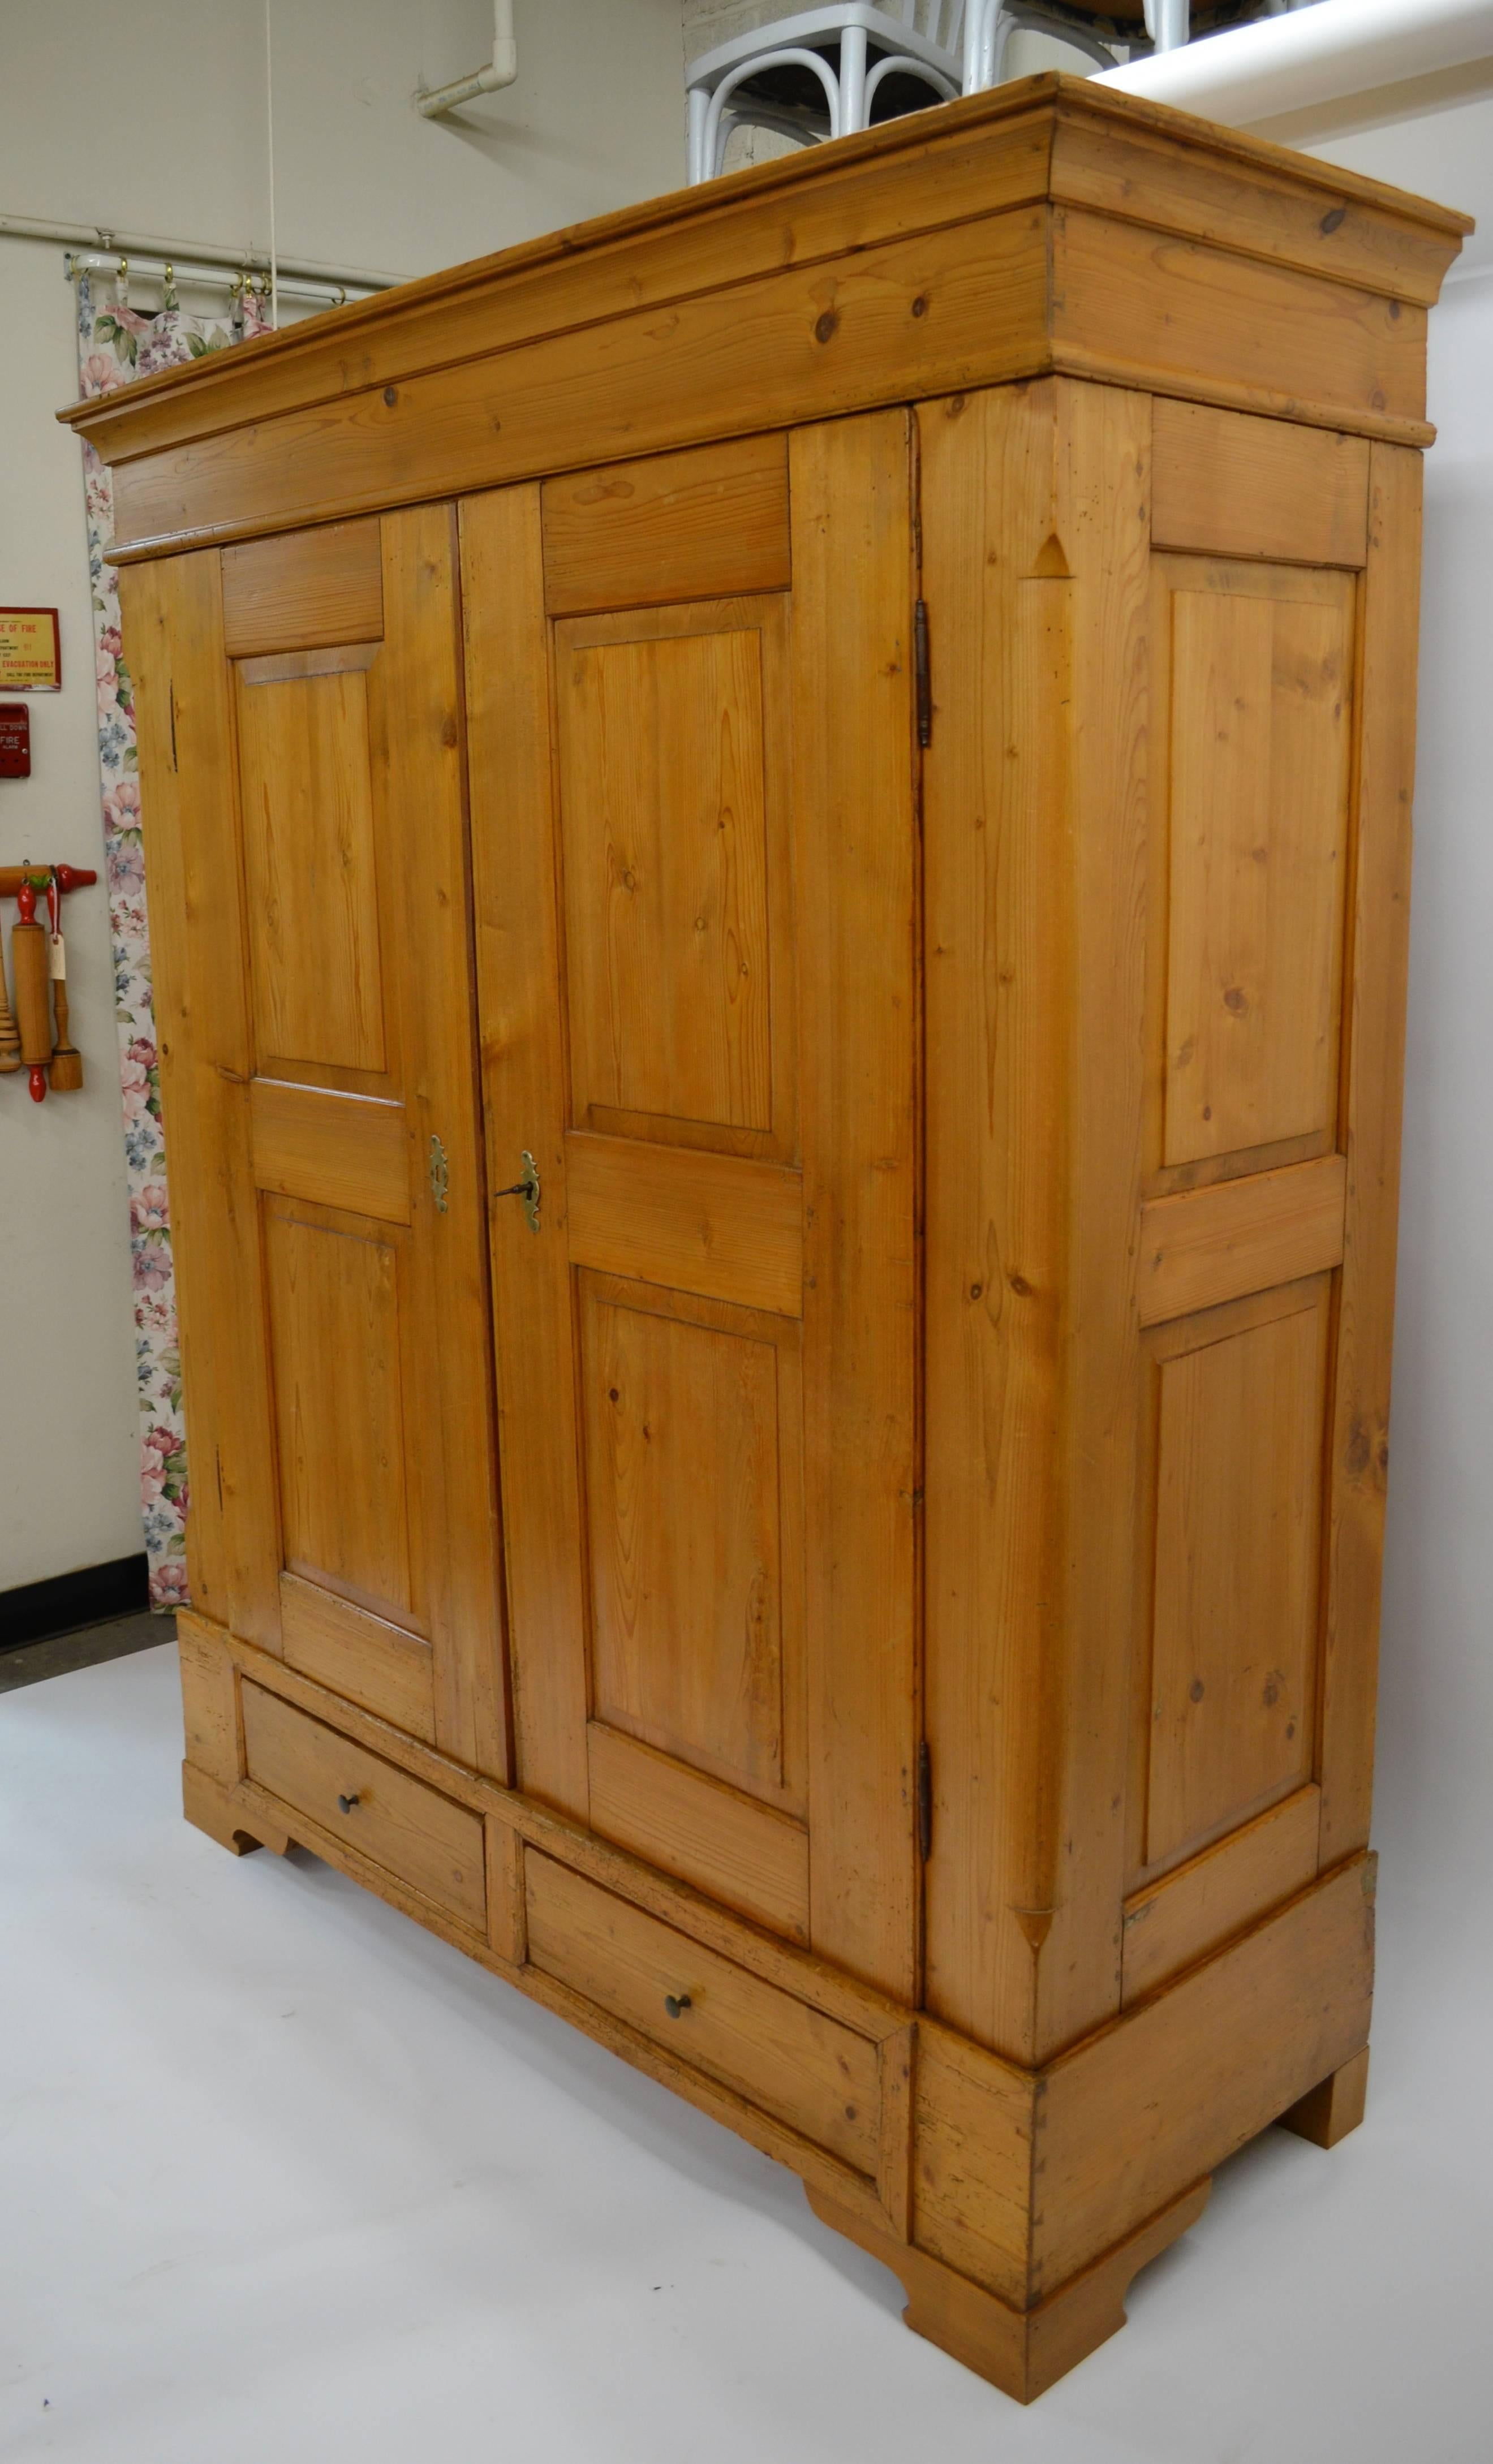 A rather plain but very distinguished eight panel pitch pine armoire from Denmark. The boldly swept crown sits above two raised panelled doors, which open to 180 degrees on fiche hinges. The notched and gently rounded front corners lead the eye to